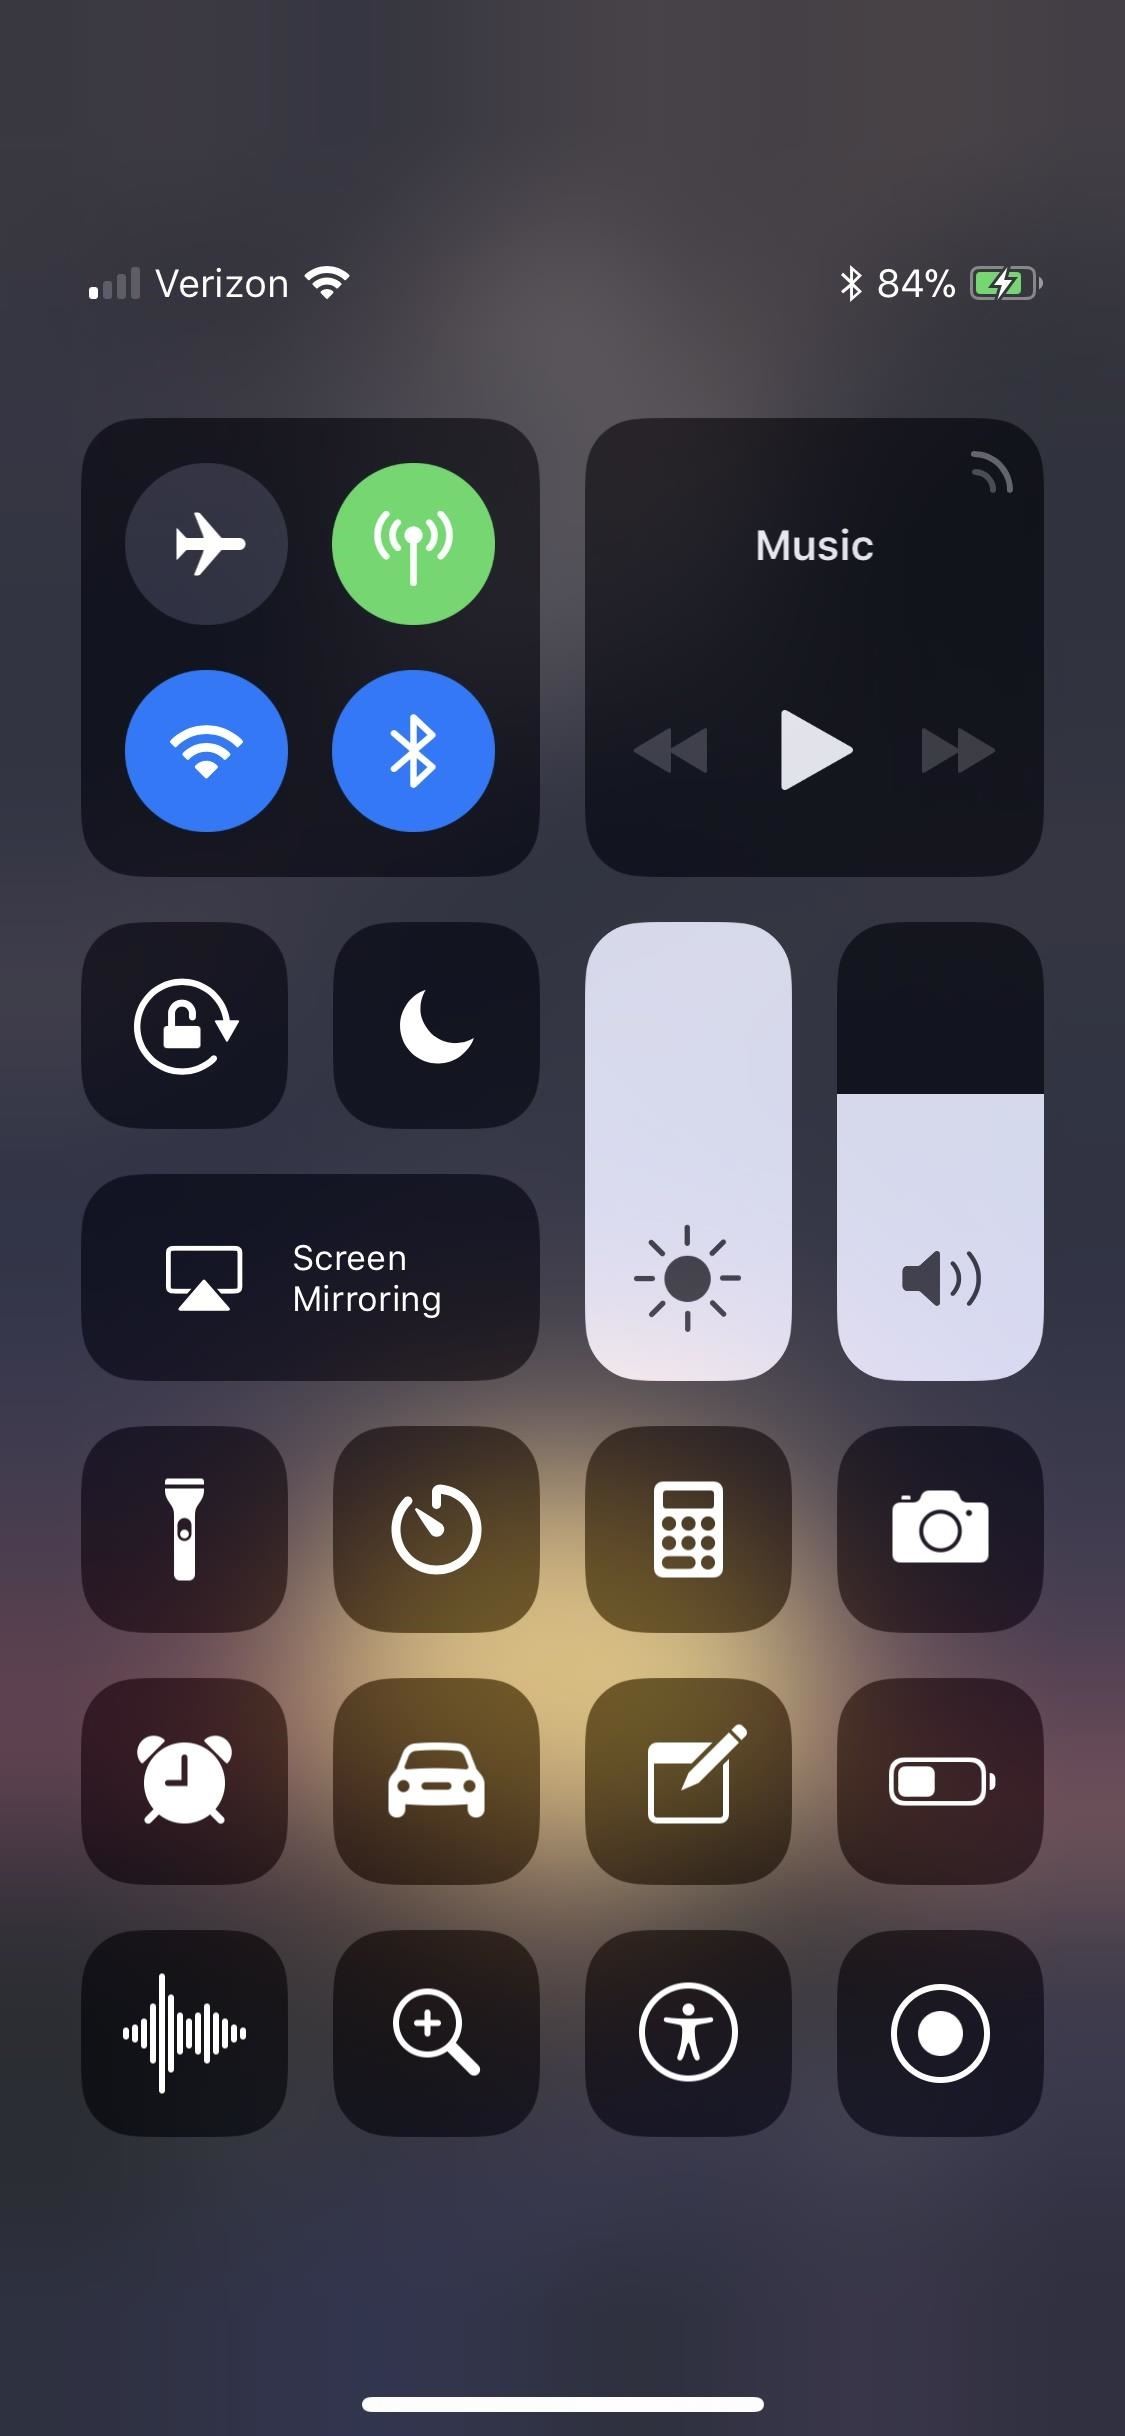 How To Pull Up Flashlight On Iphone 6 | Decoratingspecial.com